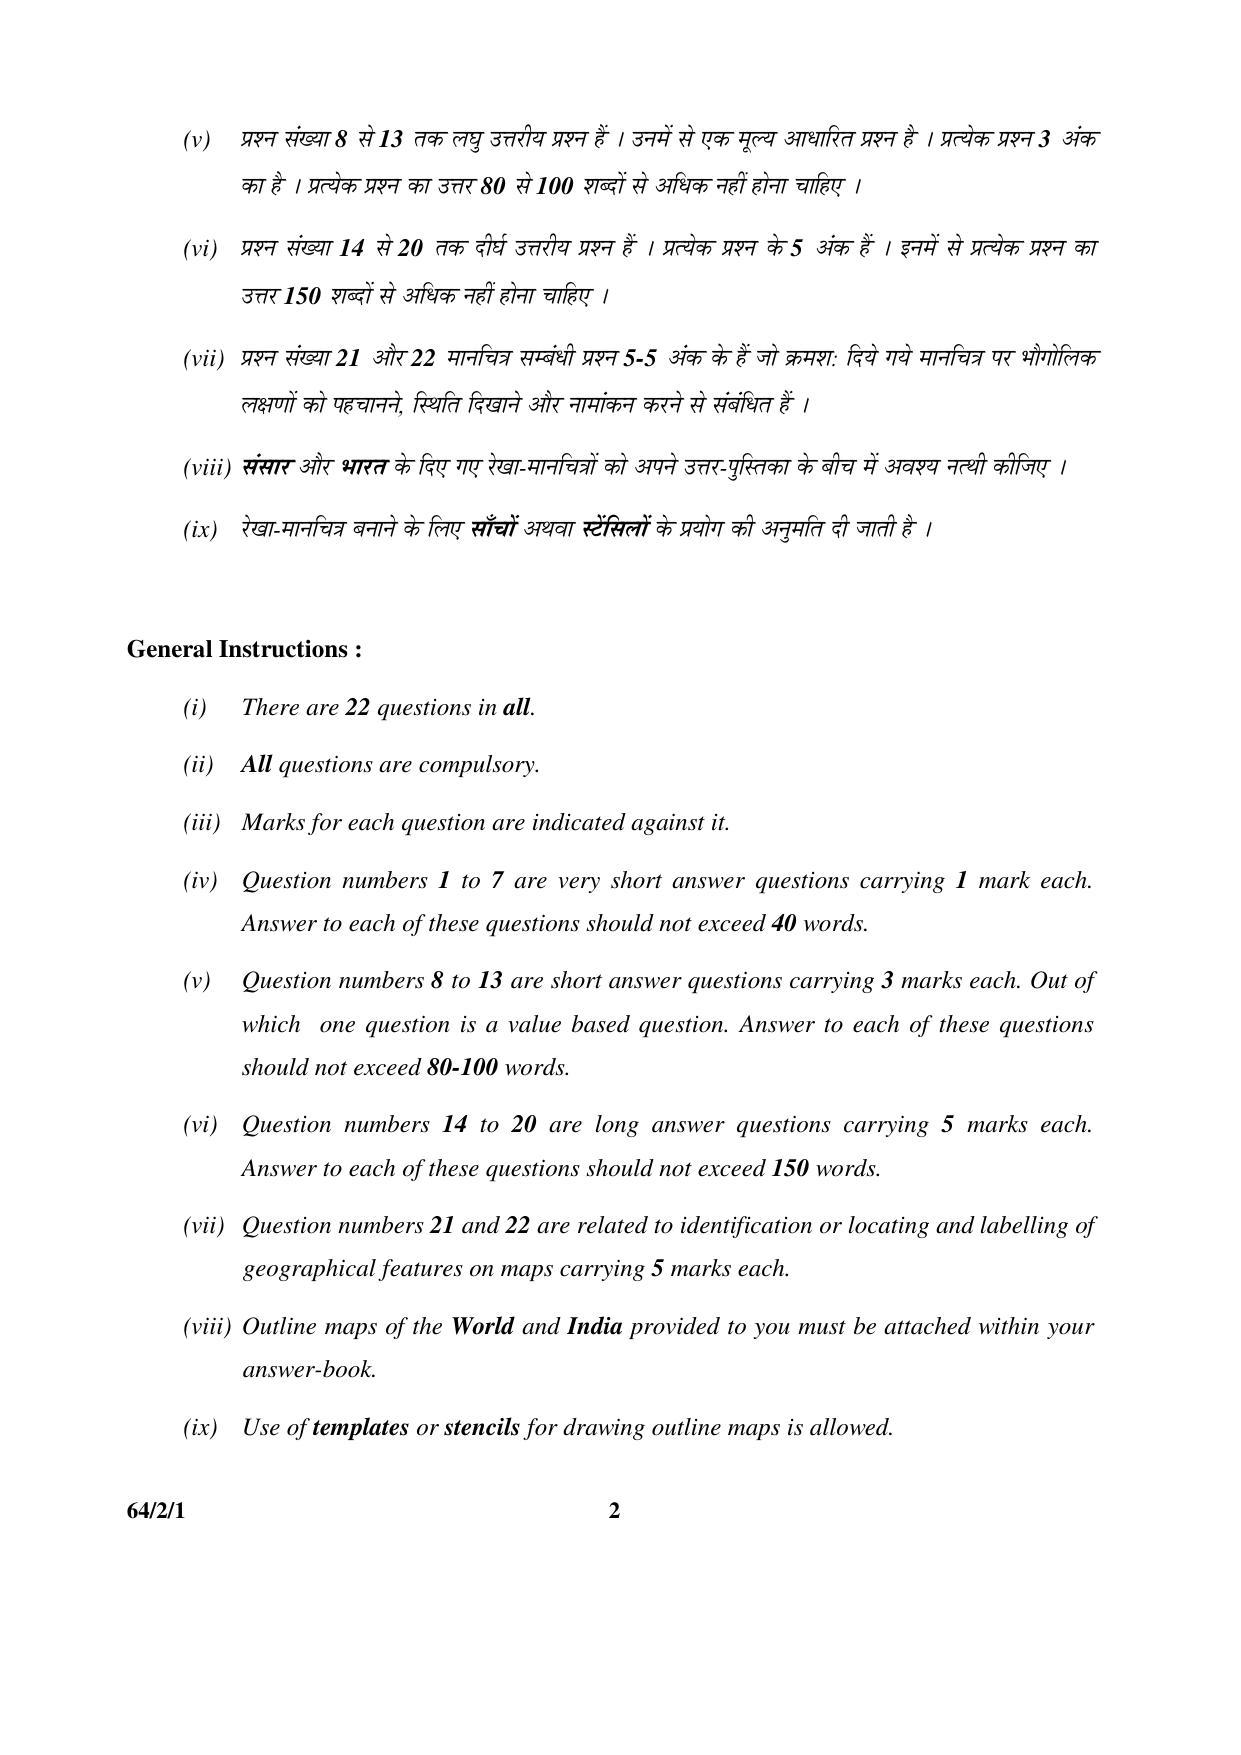 CBSE Class 12 64-2-1 Geography 2016 Question Paper - Page 2